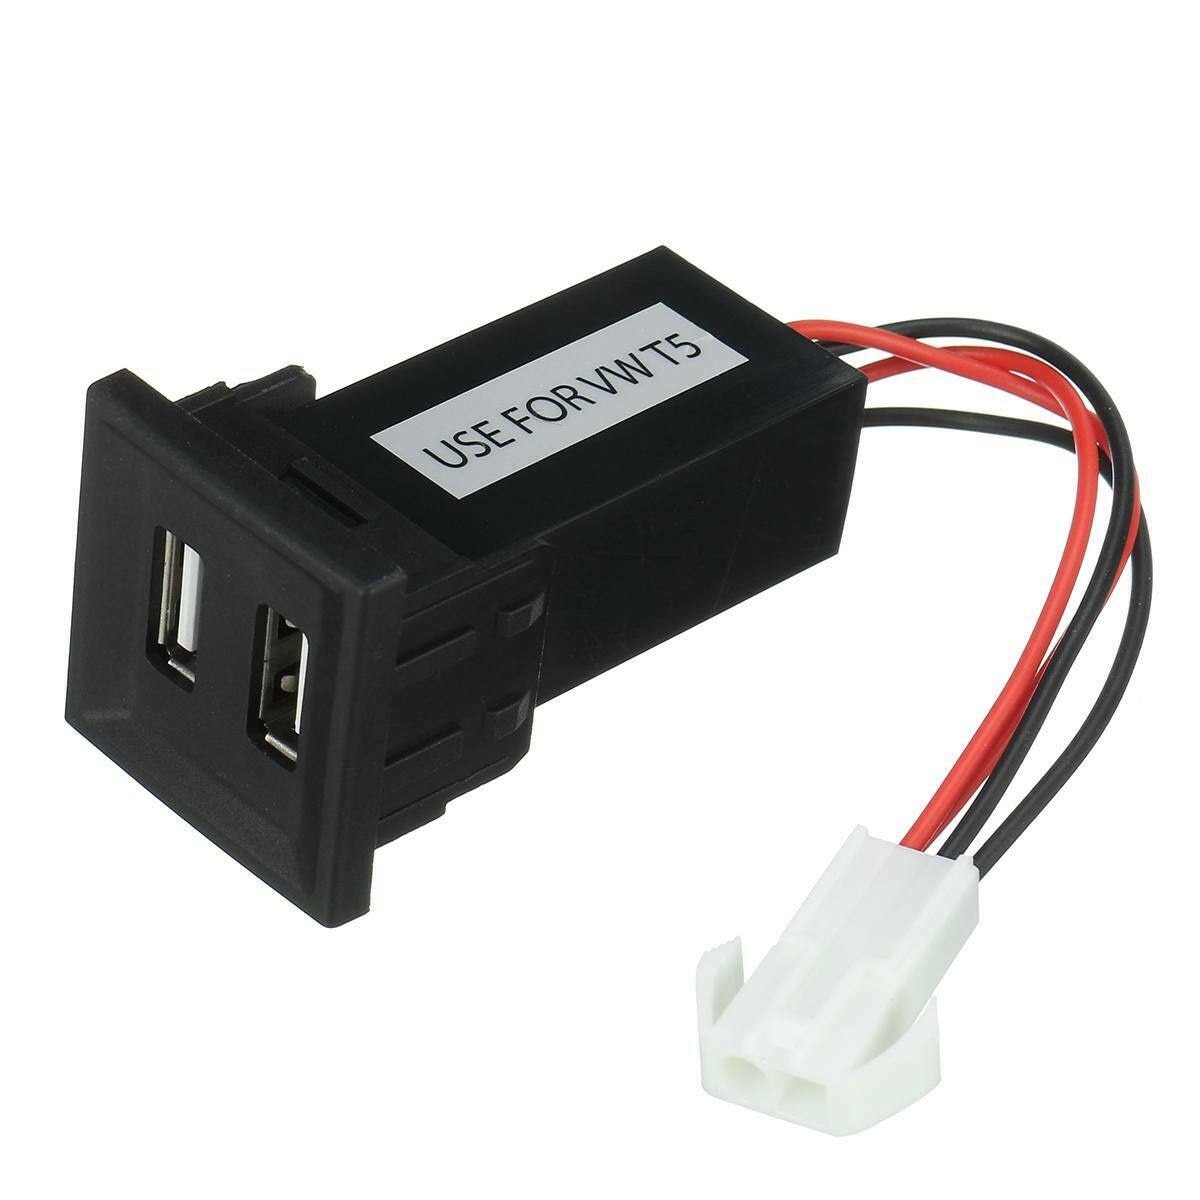 Auto Charger For Volkswagen Transporter T5 2003-2009 Dual USB